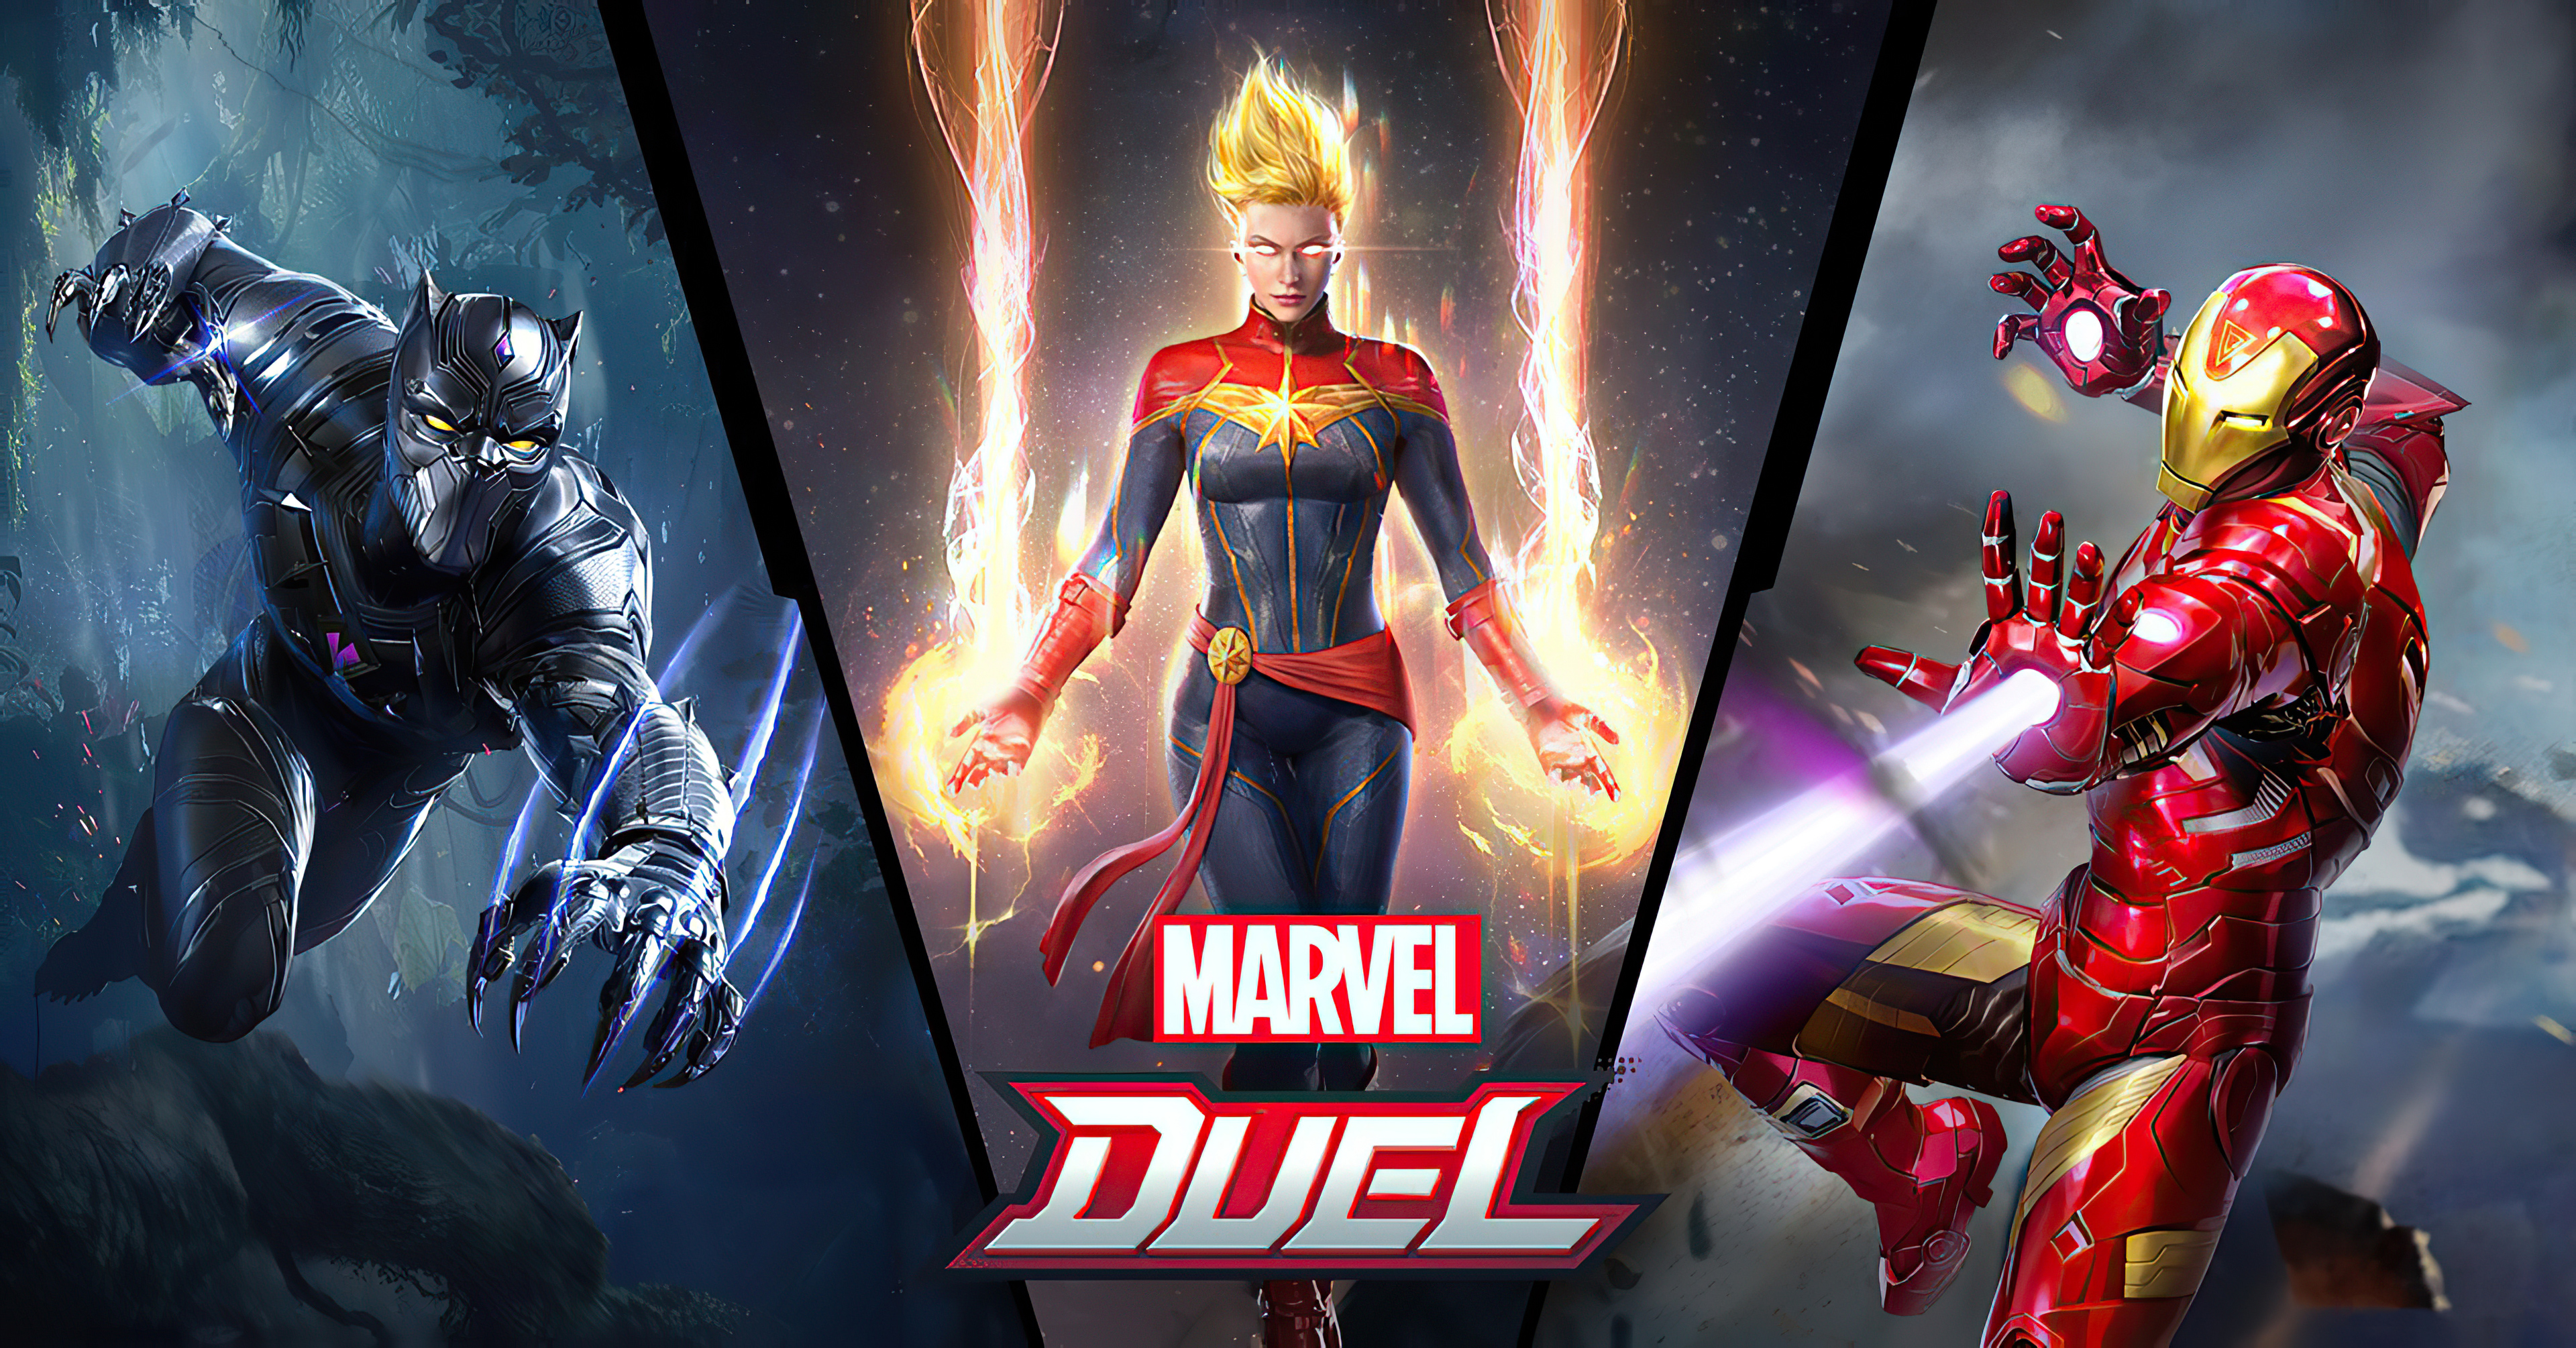 Marvel Duel 4k, HD Games, 4k Wallpapers, Images, Backgrounds, Photos